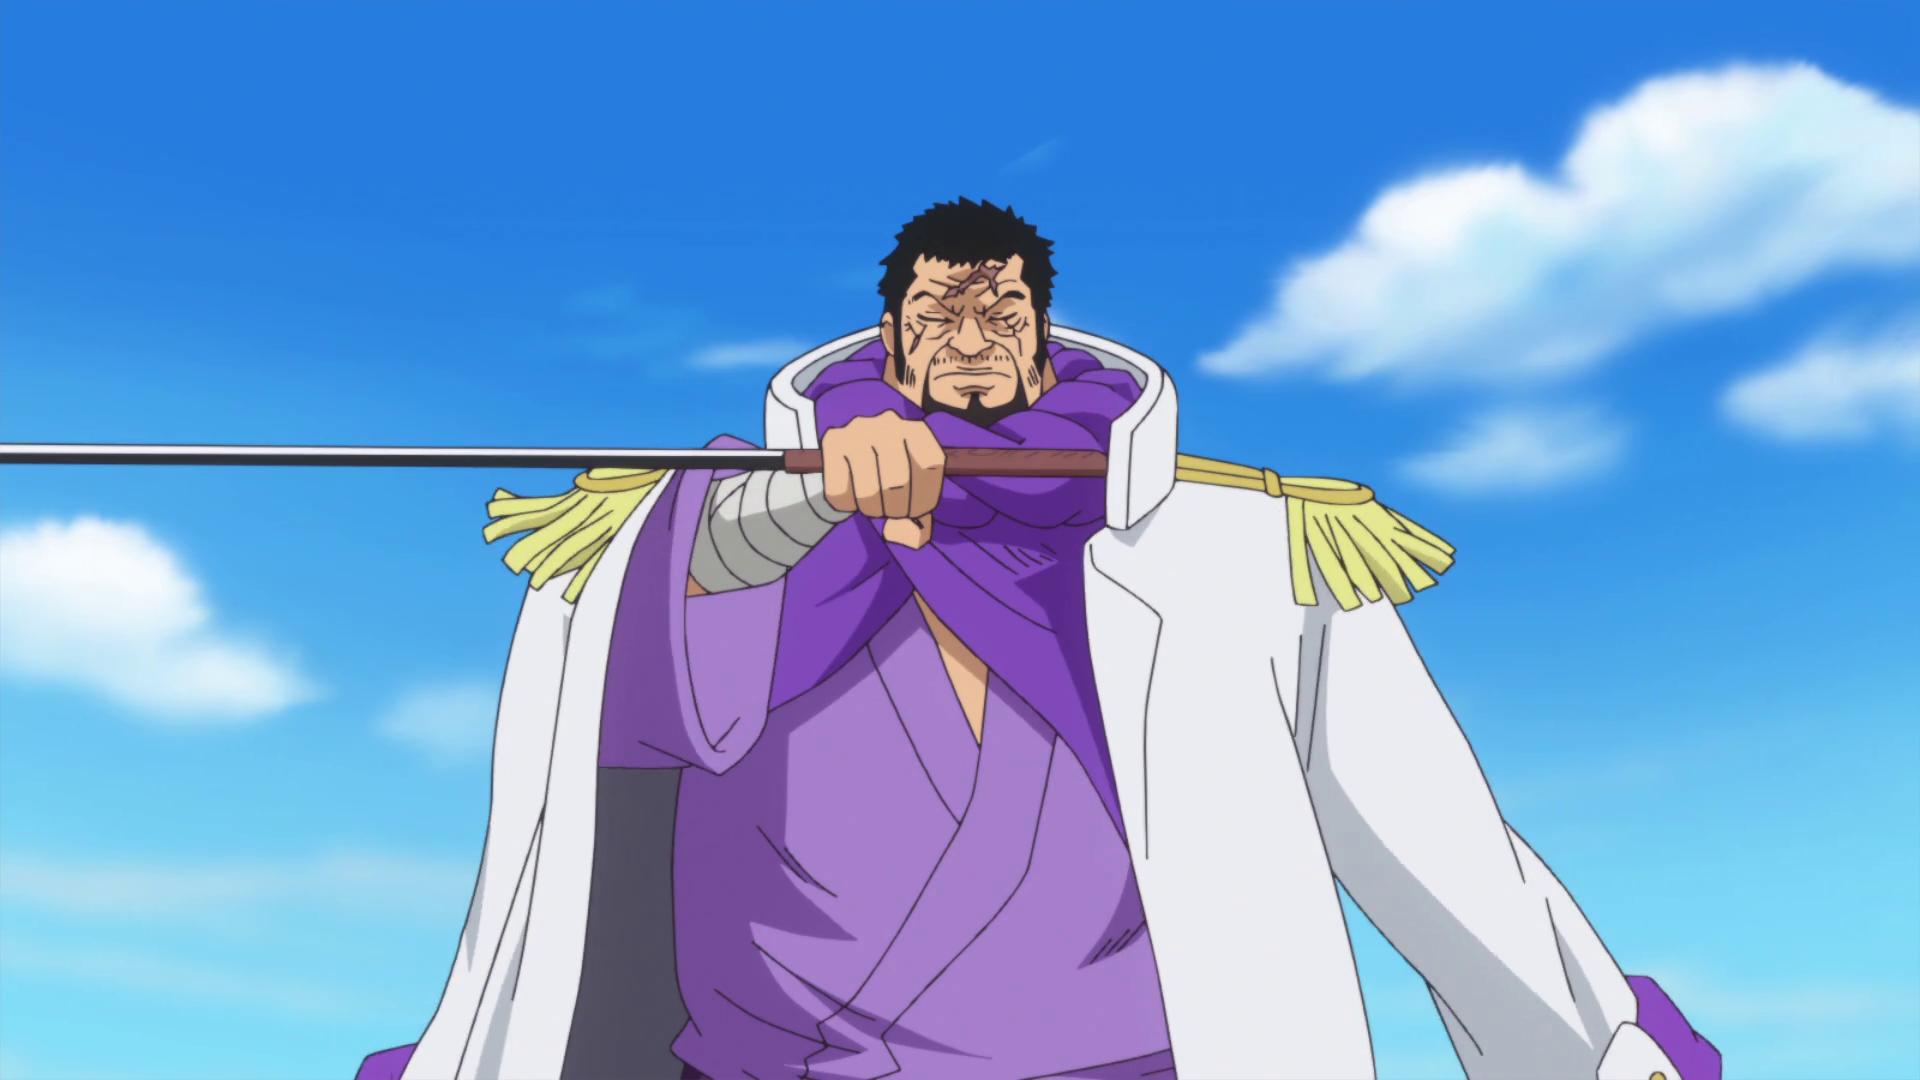 If Fujitora defeat Mihawk with his swordsmanship and Devil Fruit, would he  be considered the new strongest swordsman in the world in One Piece? - Quora